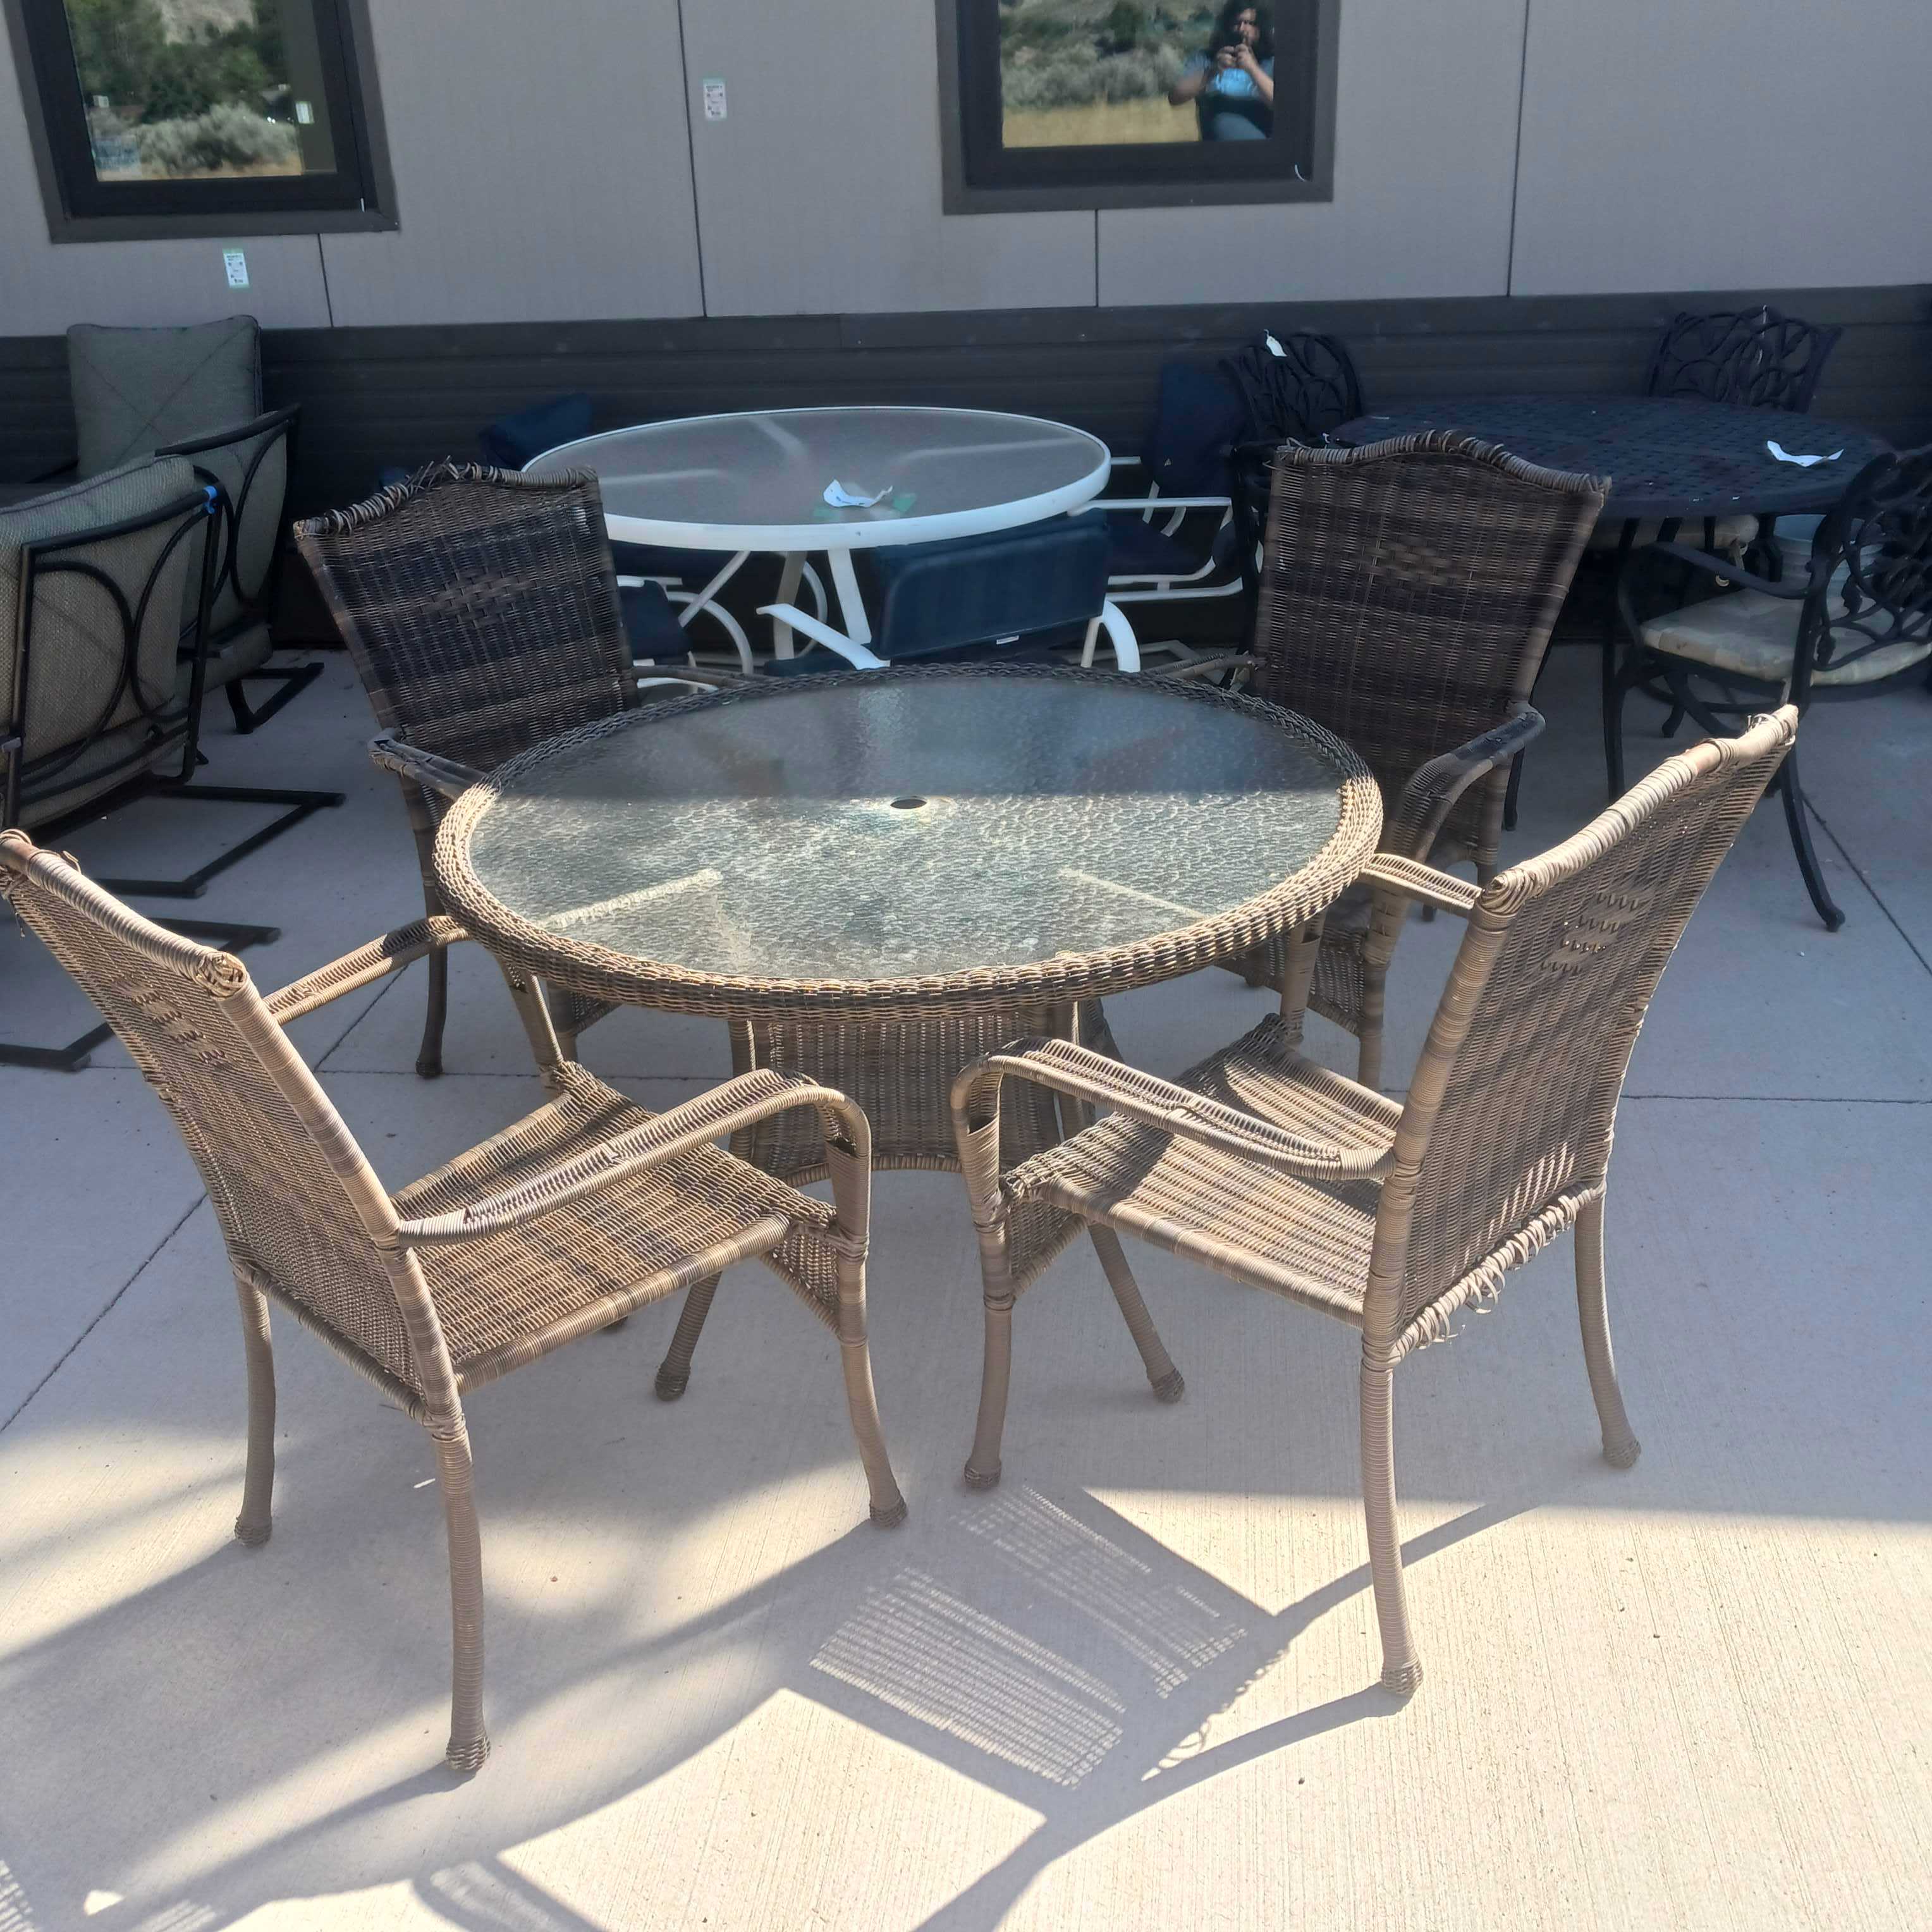 Set of 5 Aluminum Frame Resin Wicker Glasstop with Chairs Patio Table